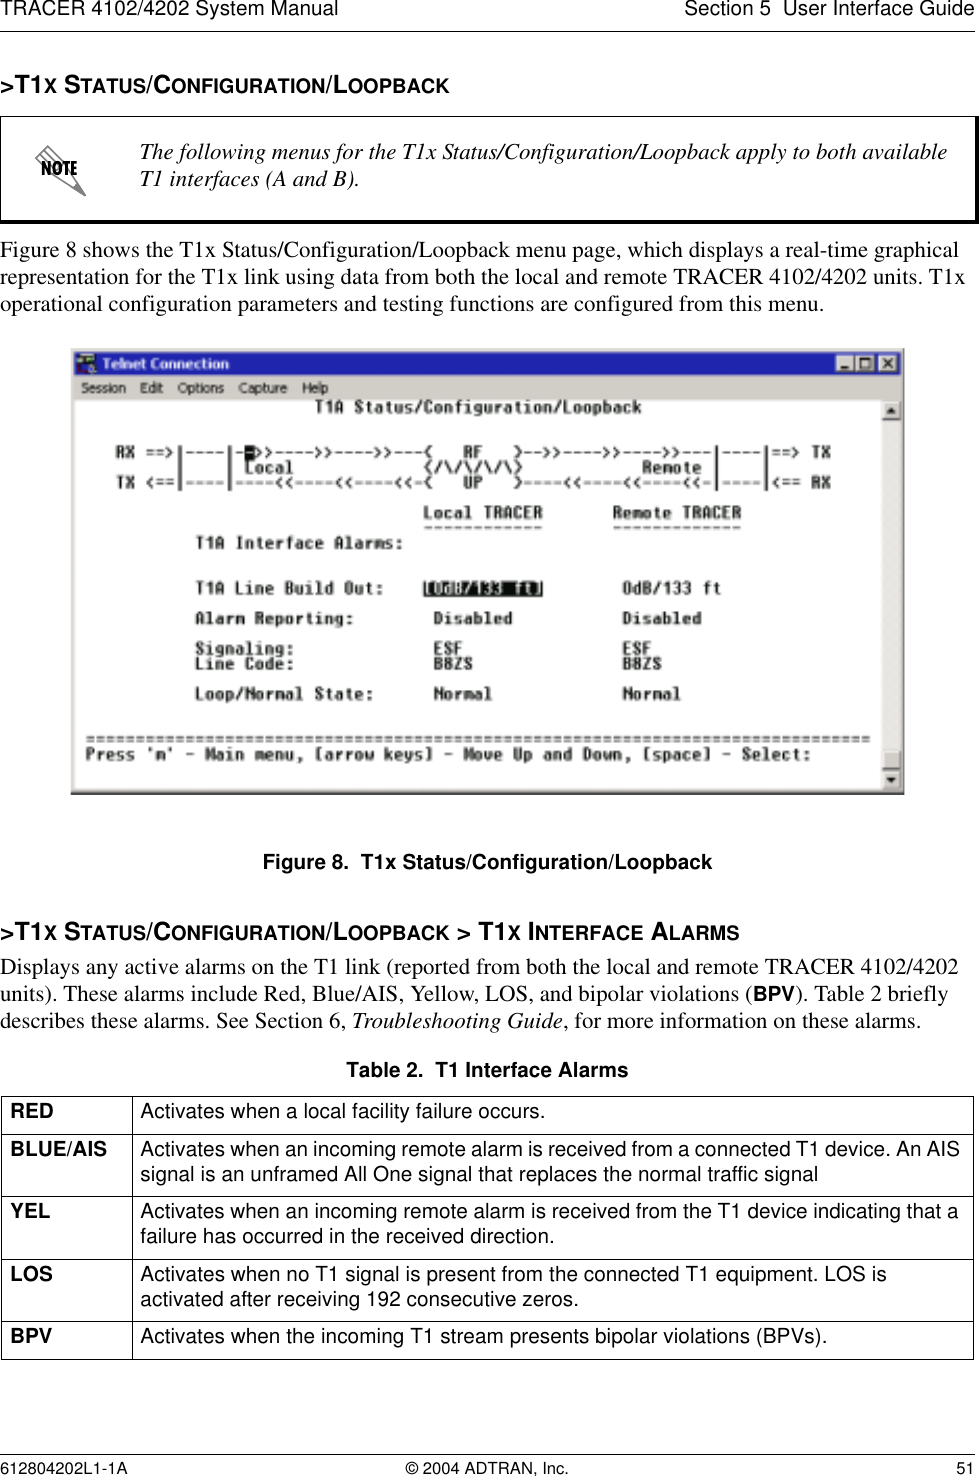 TRACER 4102/4202 System Manual Section 5  User Interface Guide612804202L1-1A © 2004 ADTRAN, Inc. 51&gt;T1X STATUS/CONFIGURATION/LOOPBACKFigure 8 shows the T1x Status/Configuration/Loopback menu page, which displays a real-time graphical representation for the T1x link using data from both the local and remote TRACER 4102/4202 units. T1x operational configuration parameters and testing functions are configured from this menu.Figure 8.  T1x Status/Configuration/Loopback&gt;T1X STATUS/CONFIGURATION/LOOPBACK &gt; T1X INTERFACE ALARMSDisplays any active alarms on the T1 link (reported from both the local and remote TRACER 4102/4202 units). These alarms include Red, Blue/AIS, Yellow, LOS, and bipolar violations (BPV). Table 2 briefly describes these alarms. See Section 6, Troubleshooting Guide, for more information on these alarms.The following menus for the T1x Status/Configuration/Loopback apply to both available T1 interfaces (A and B).Table 2.  T1 Interface AlarmsRED Activates when a local facility failure occurs.BLUE/AIS Activates when an incoming remote alarm is received from a connected T1 device. An AIS signal is an unframed All One signal that replaces the normal traffic signalYEL Activates when an incoming remote alarm is received from the T1 device indicating that a failure has occurred in the received direction.LOS Activates when no T1 signal is present from the connected T1 equipment. LOS is activated after receiving 192 consecutive zeros.BPV Activates when the incoming T1 stream presents bipolar violations (BPVs).